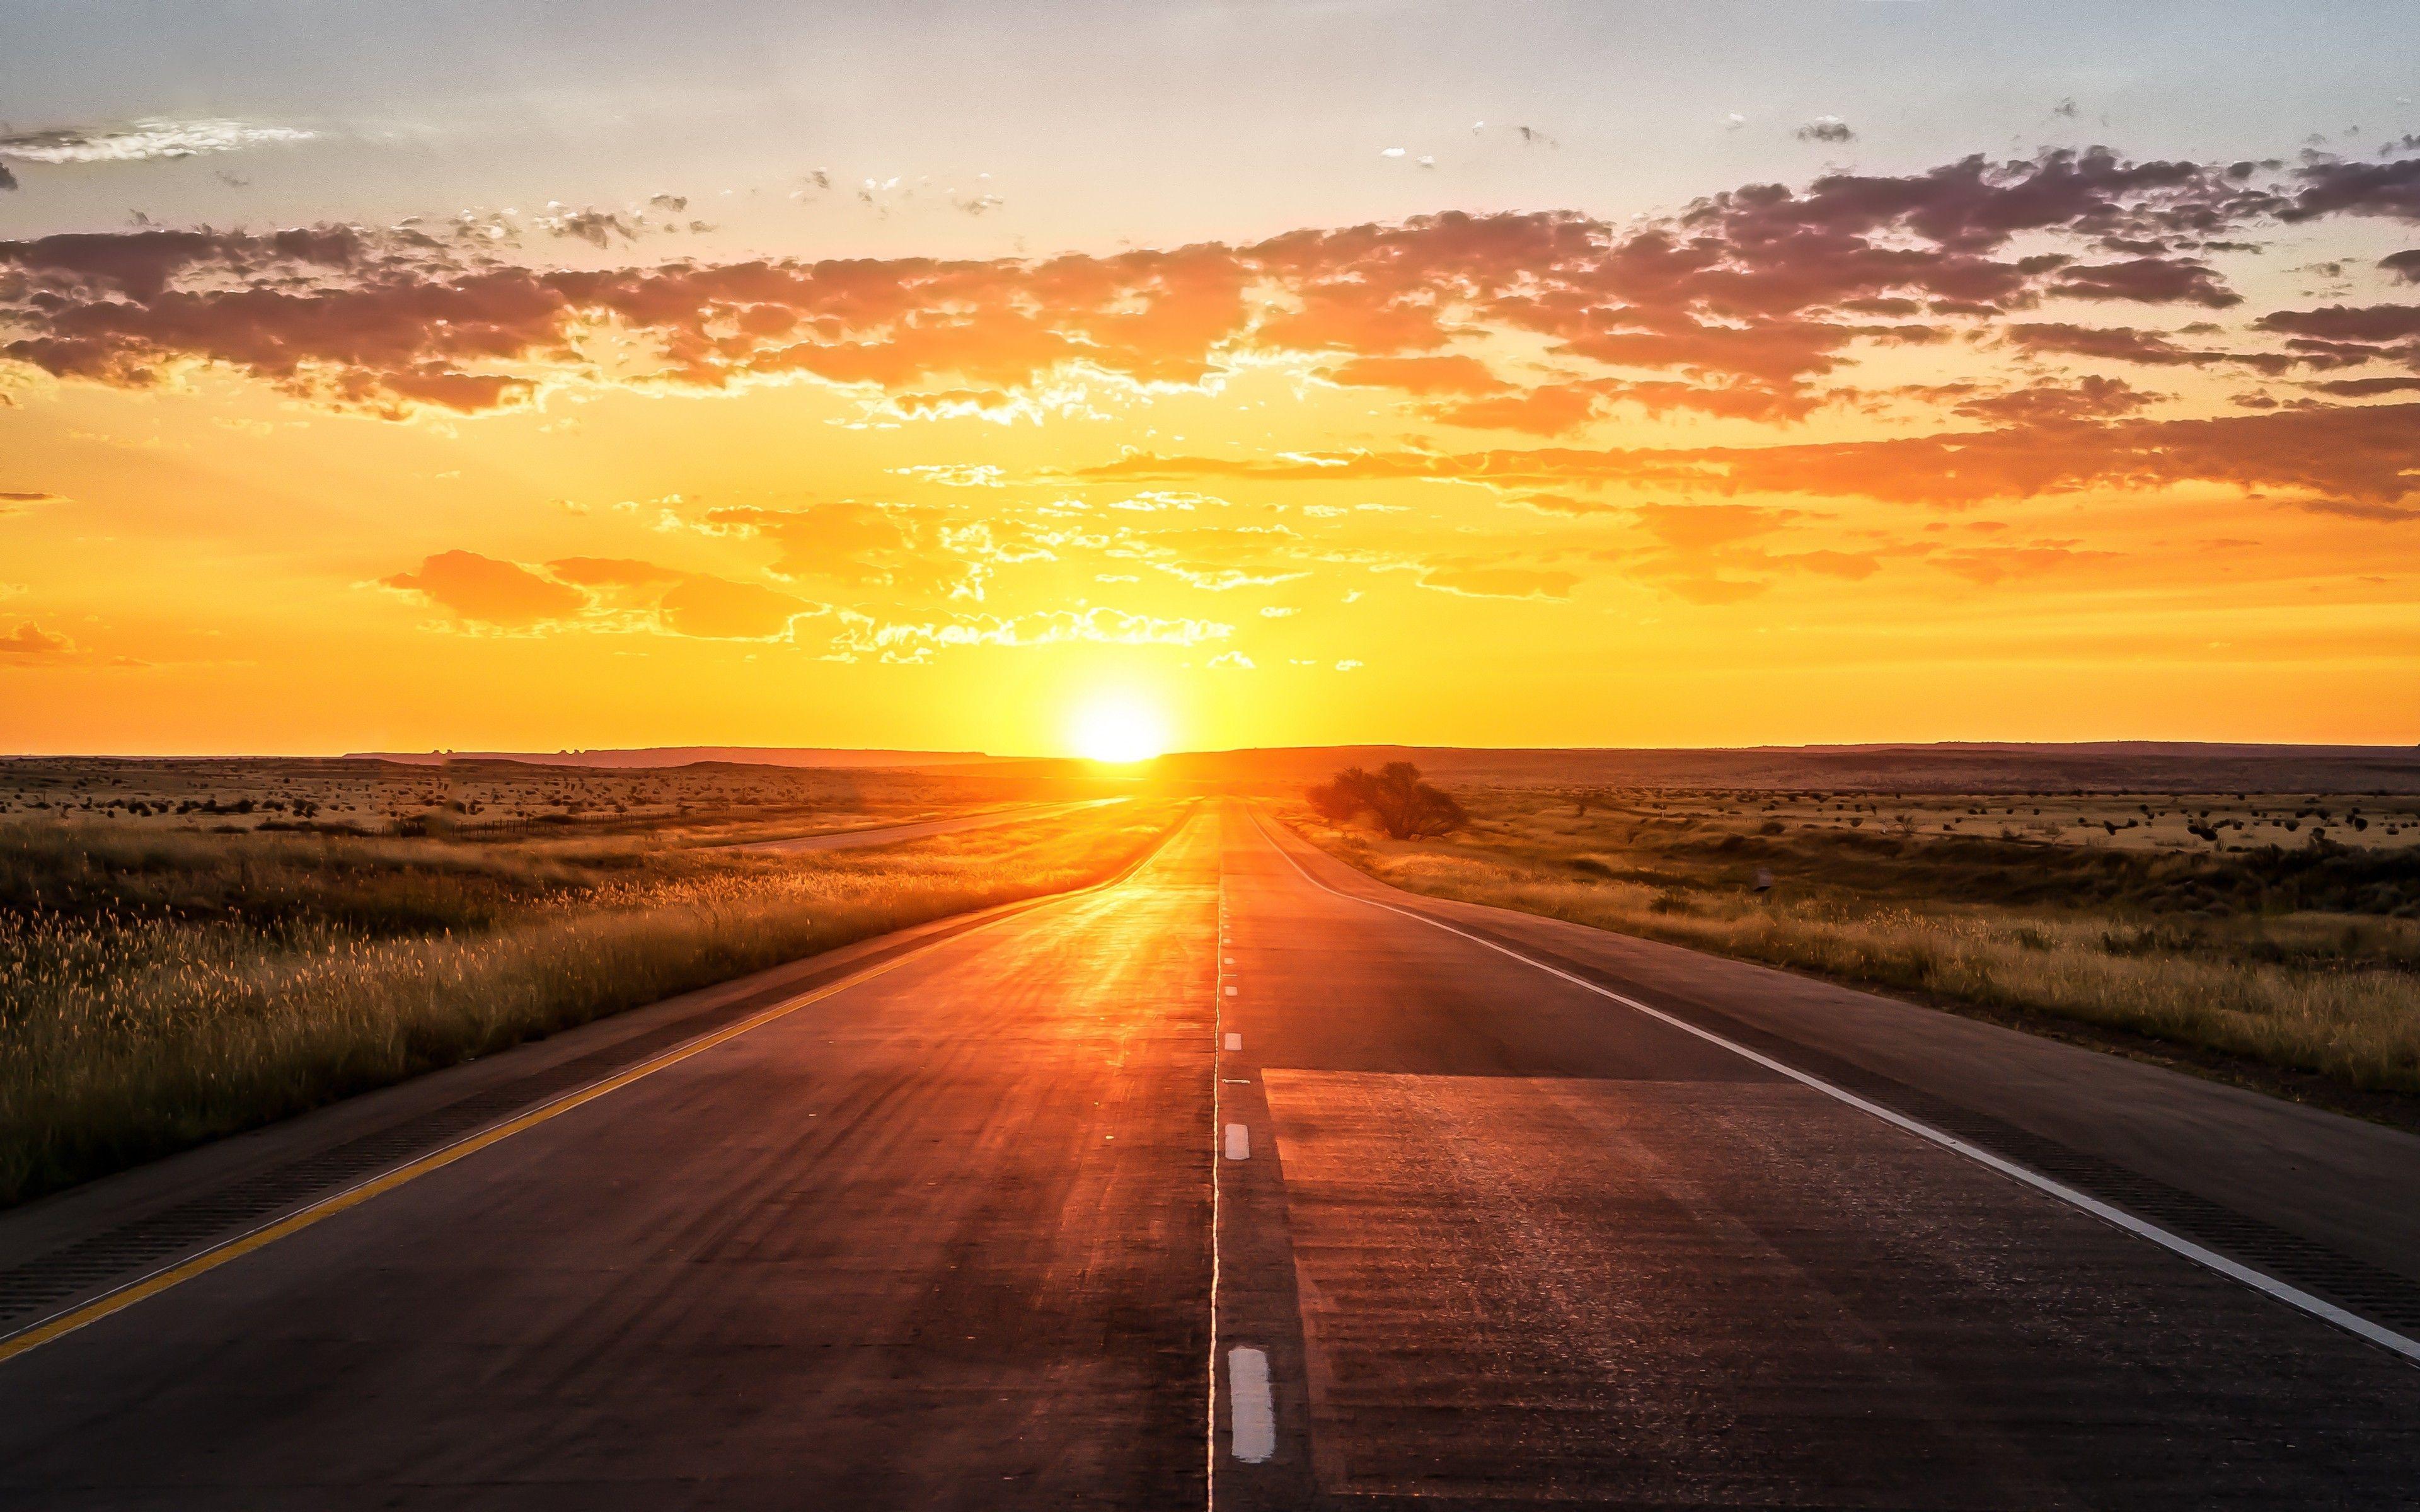 Sunset Road Wallpapers Top Free Sunset Road Backgrounds Wallpaperaccess